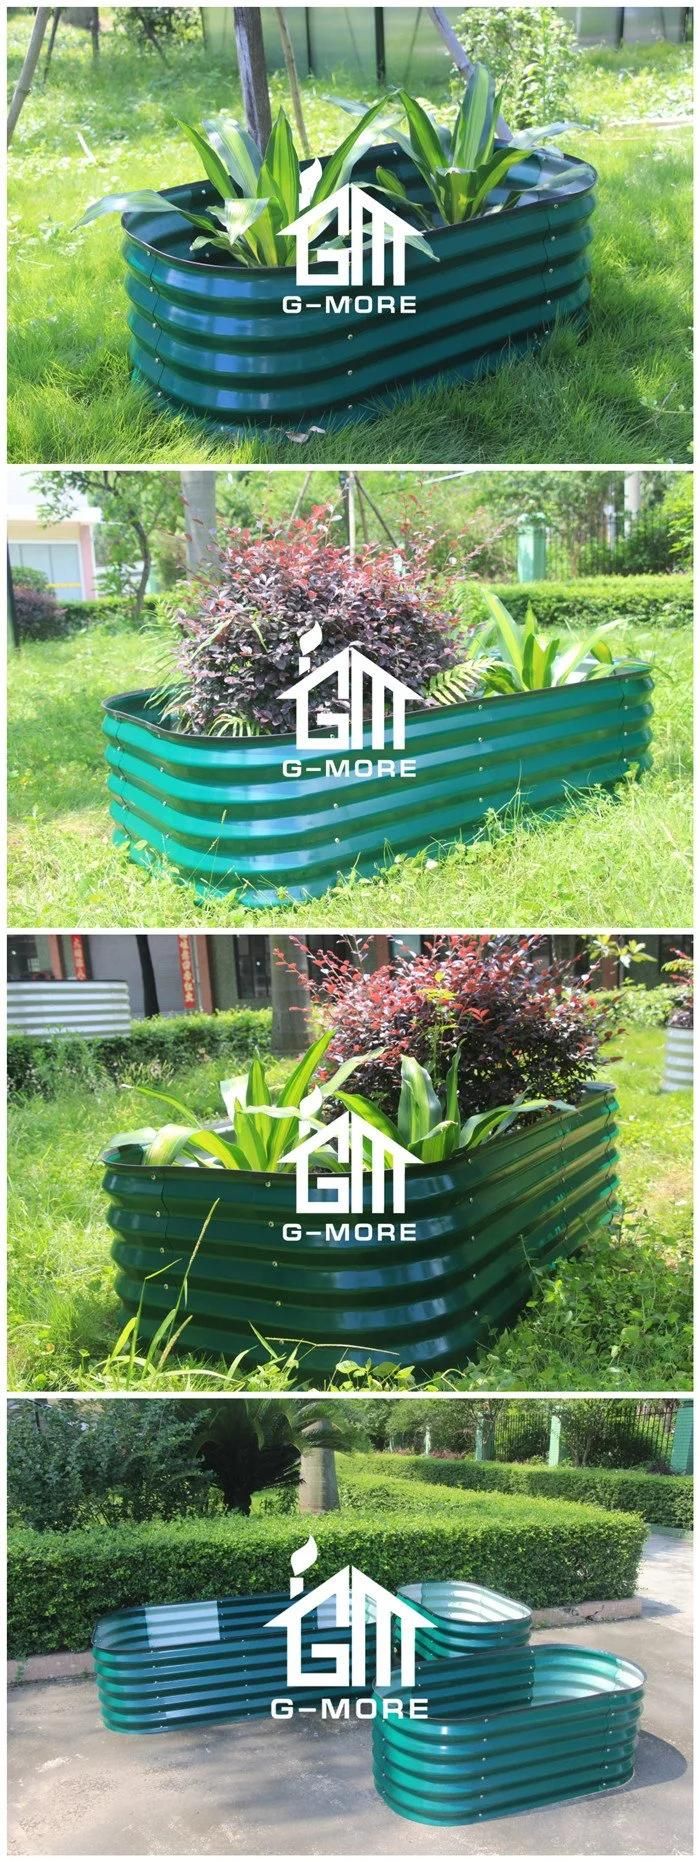 Oval Powder Coated Galvanized Planter for Growing Herbs Flowers Vegetables Raised Garden Beds